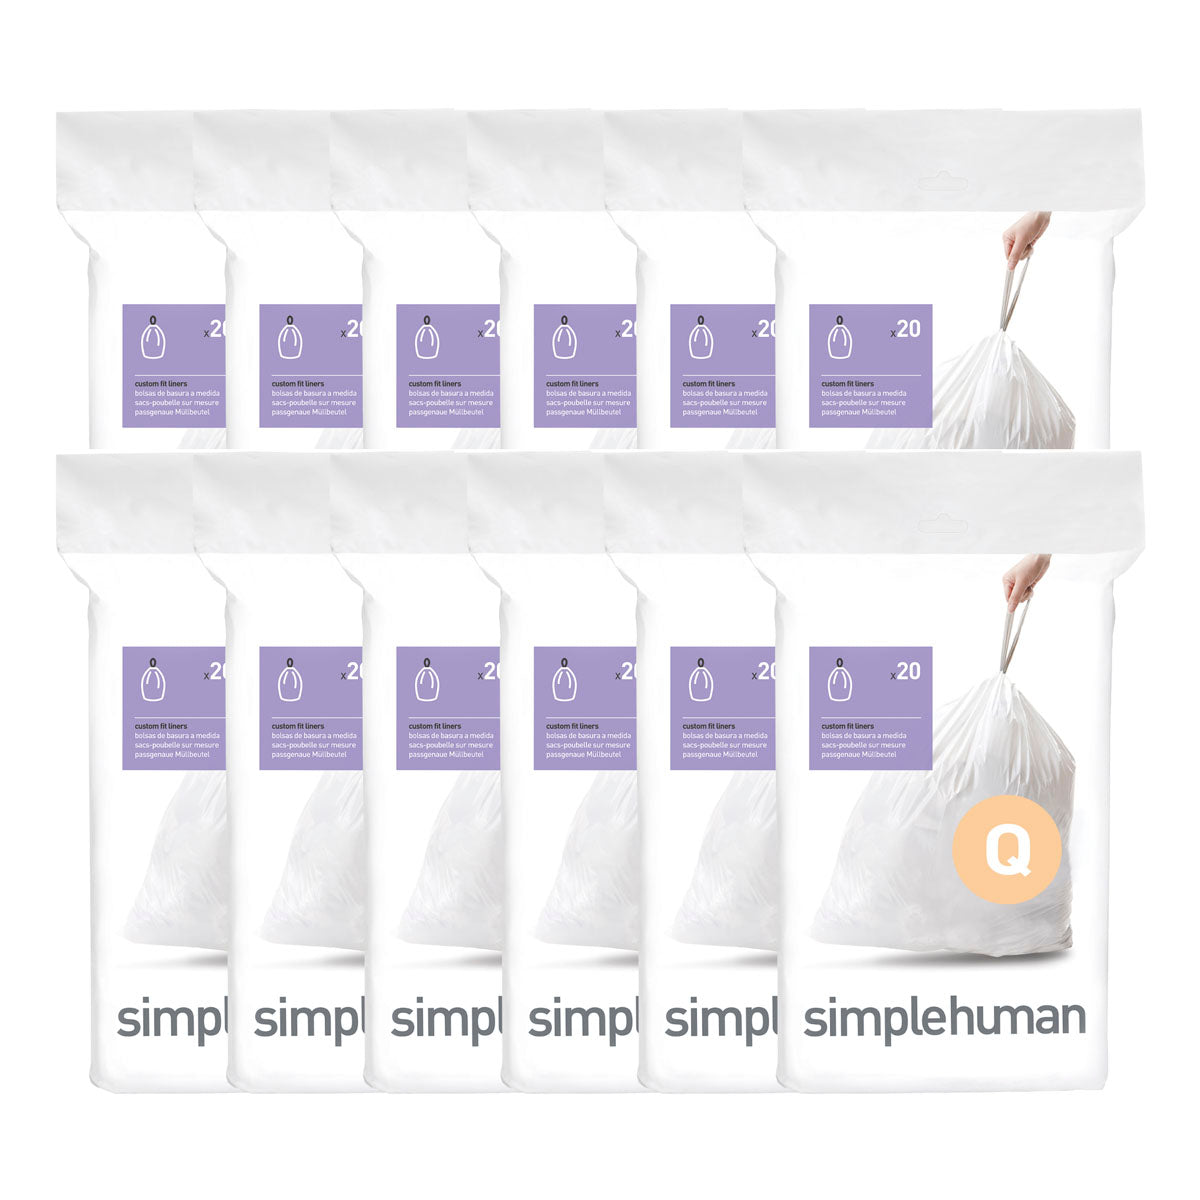 simplehuman Custom Fit Can Liners